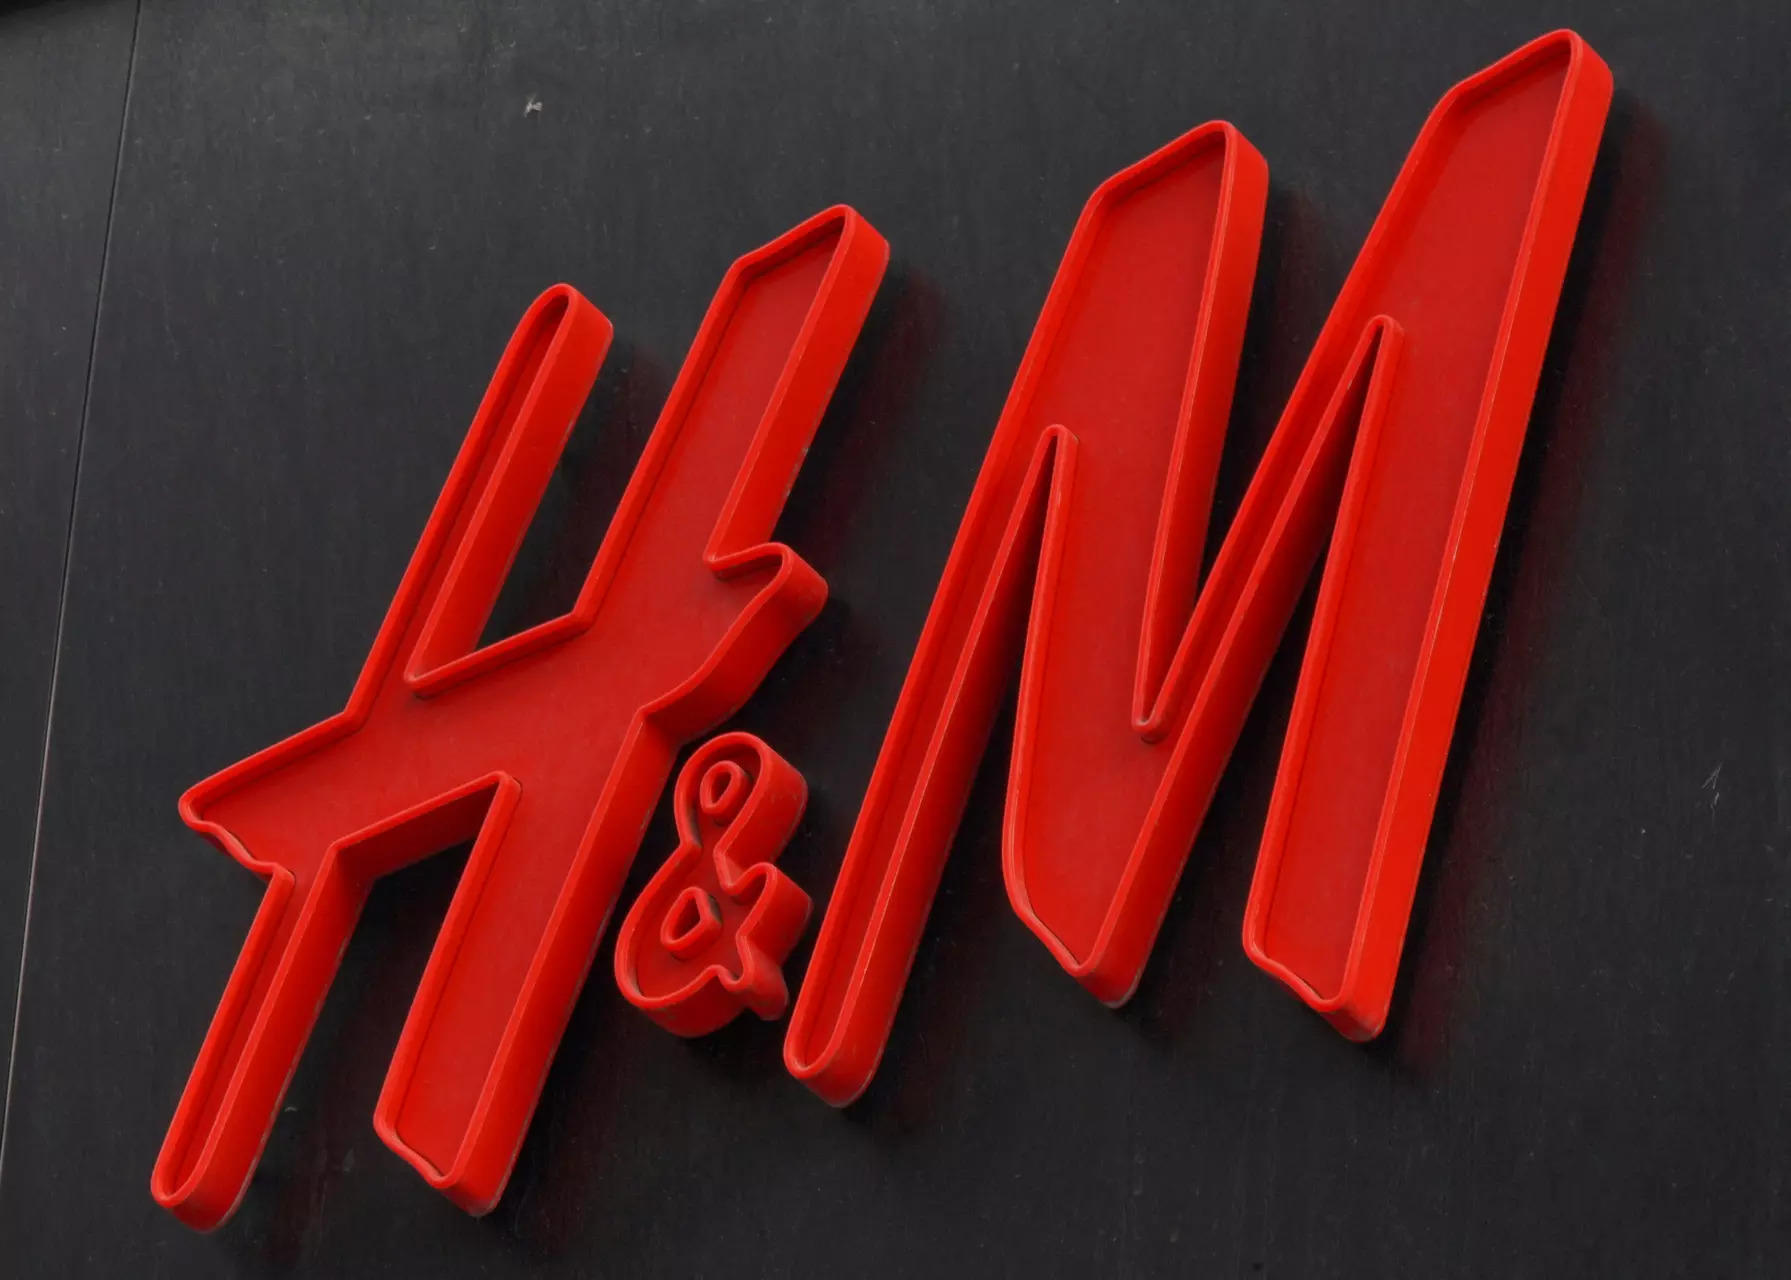 COS launches Resell to prolong the lifespan of preloved clothes - H&M Group